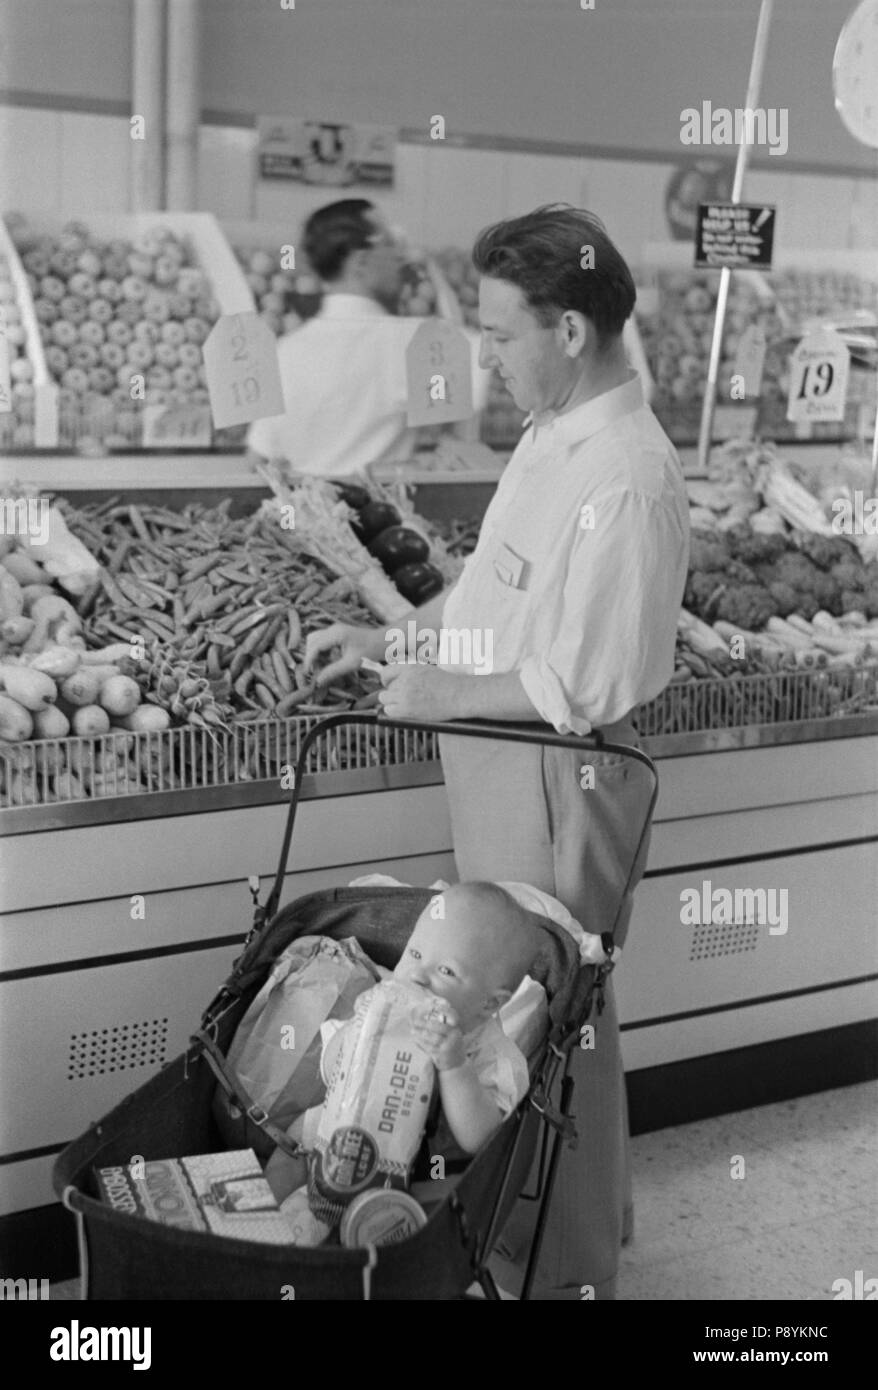 Man with Child Shopping in Cooperative Store, Greenbelt, Maryland, USA, Marion Post Wolcott, Farm Security Administration, September 1938 Stock Photo